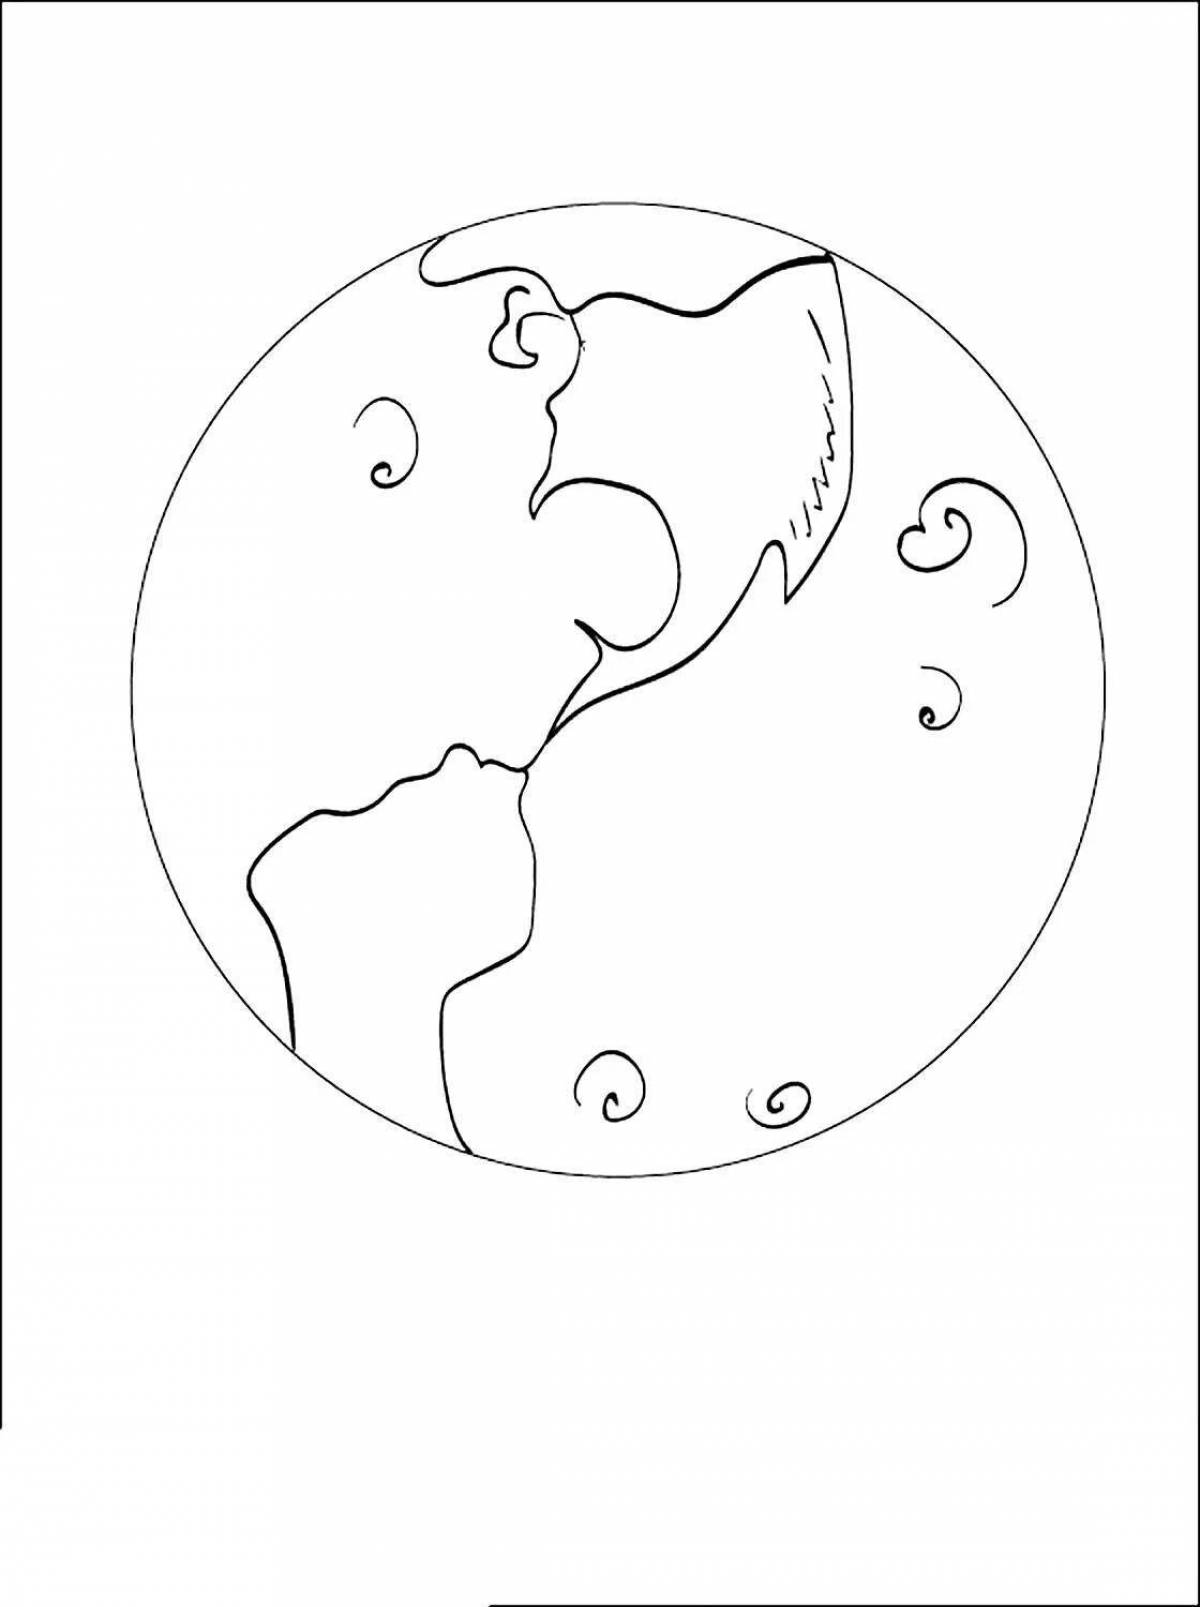 Coloring page magical planet mars